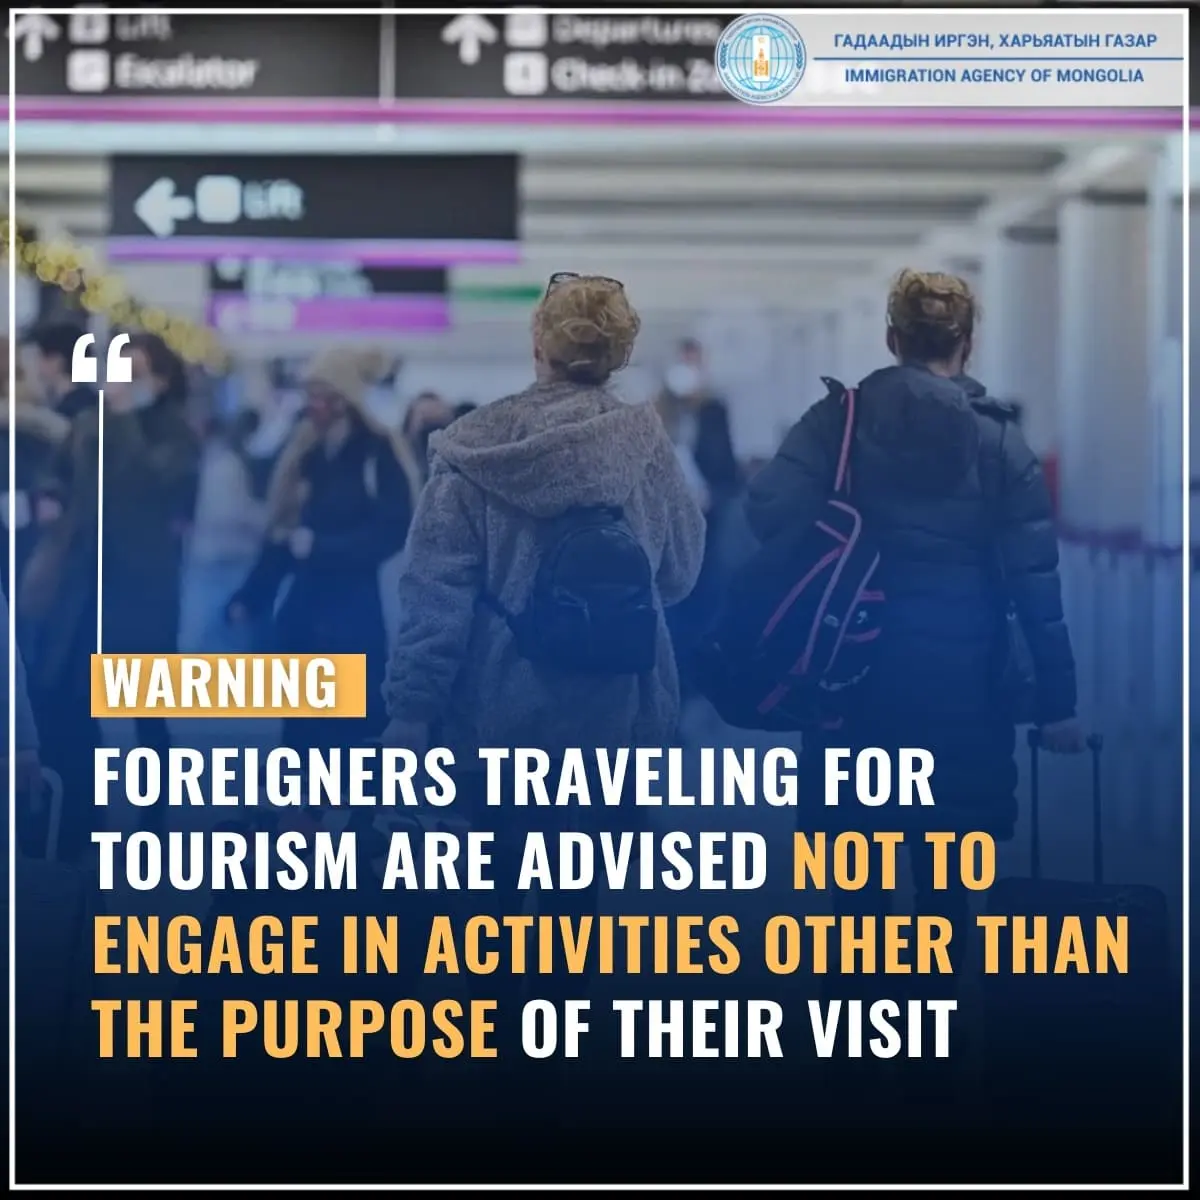 The Immigration Agency of Mongolia advises foreigners traveling for tourism to refrain from engaging in activities beyond the purpose of their visit.